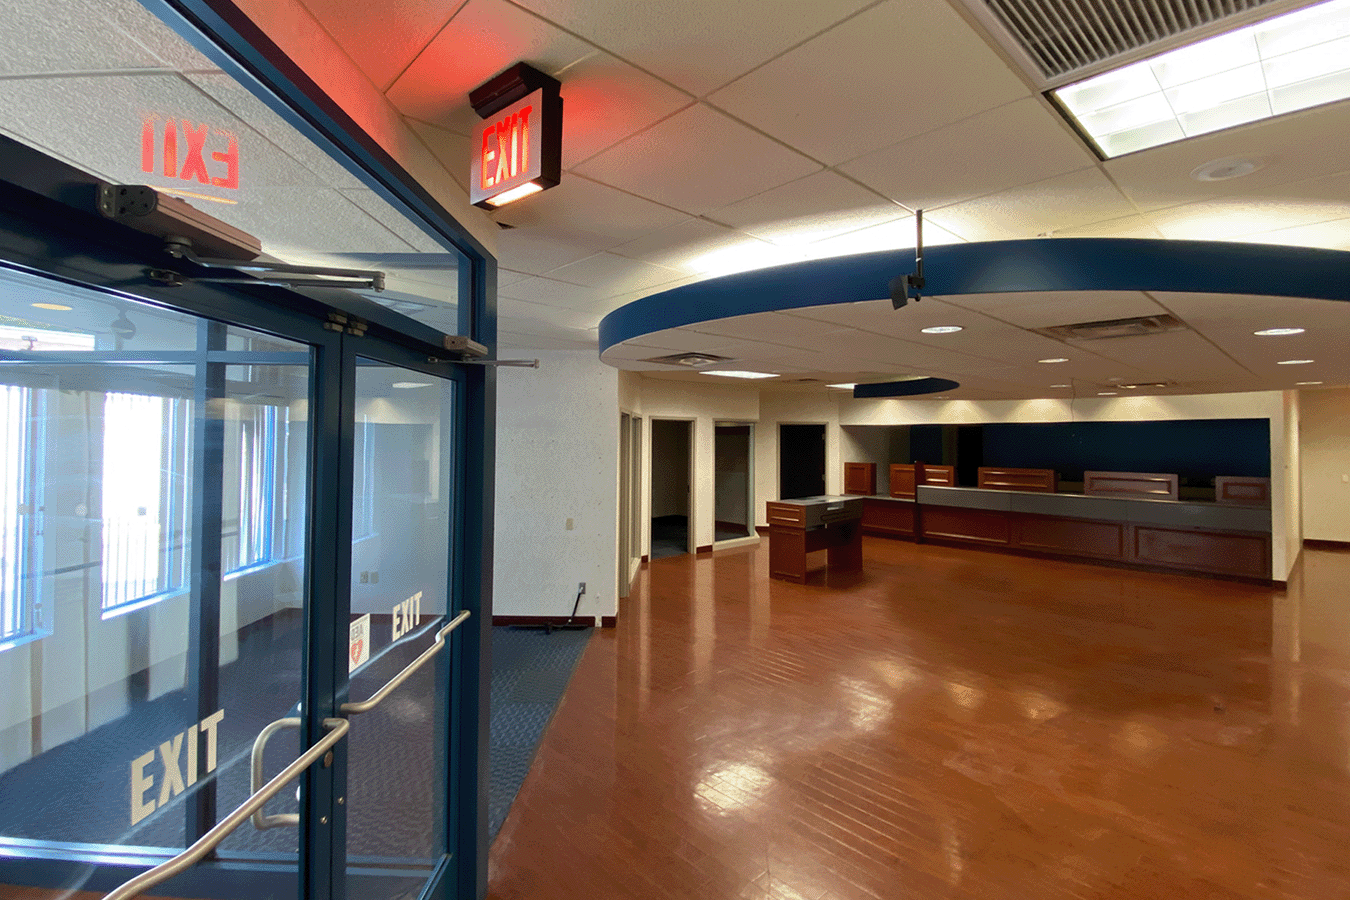 view from entryway into large open area former bank